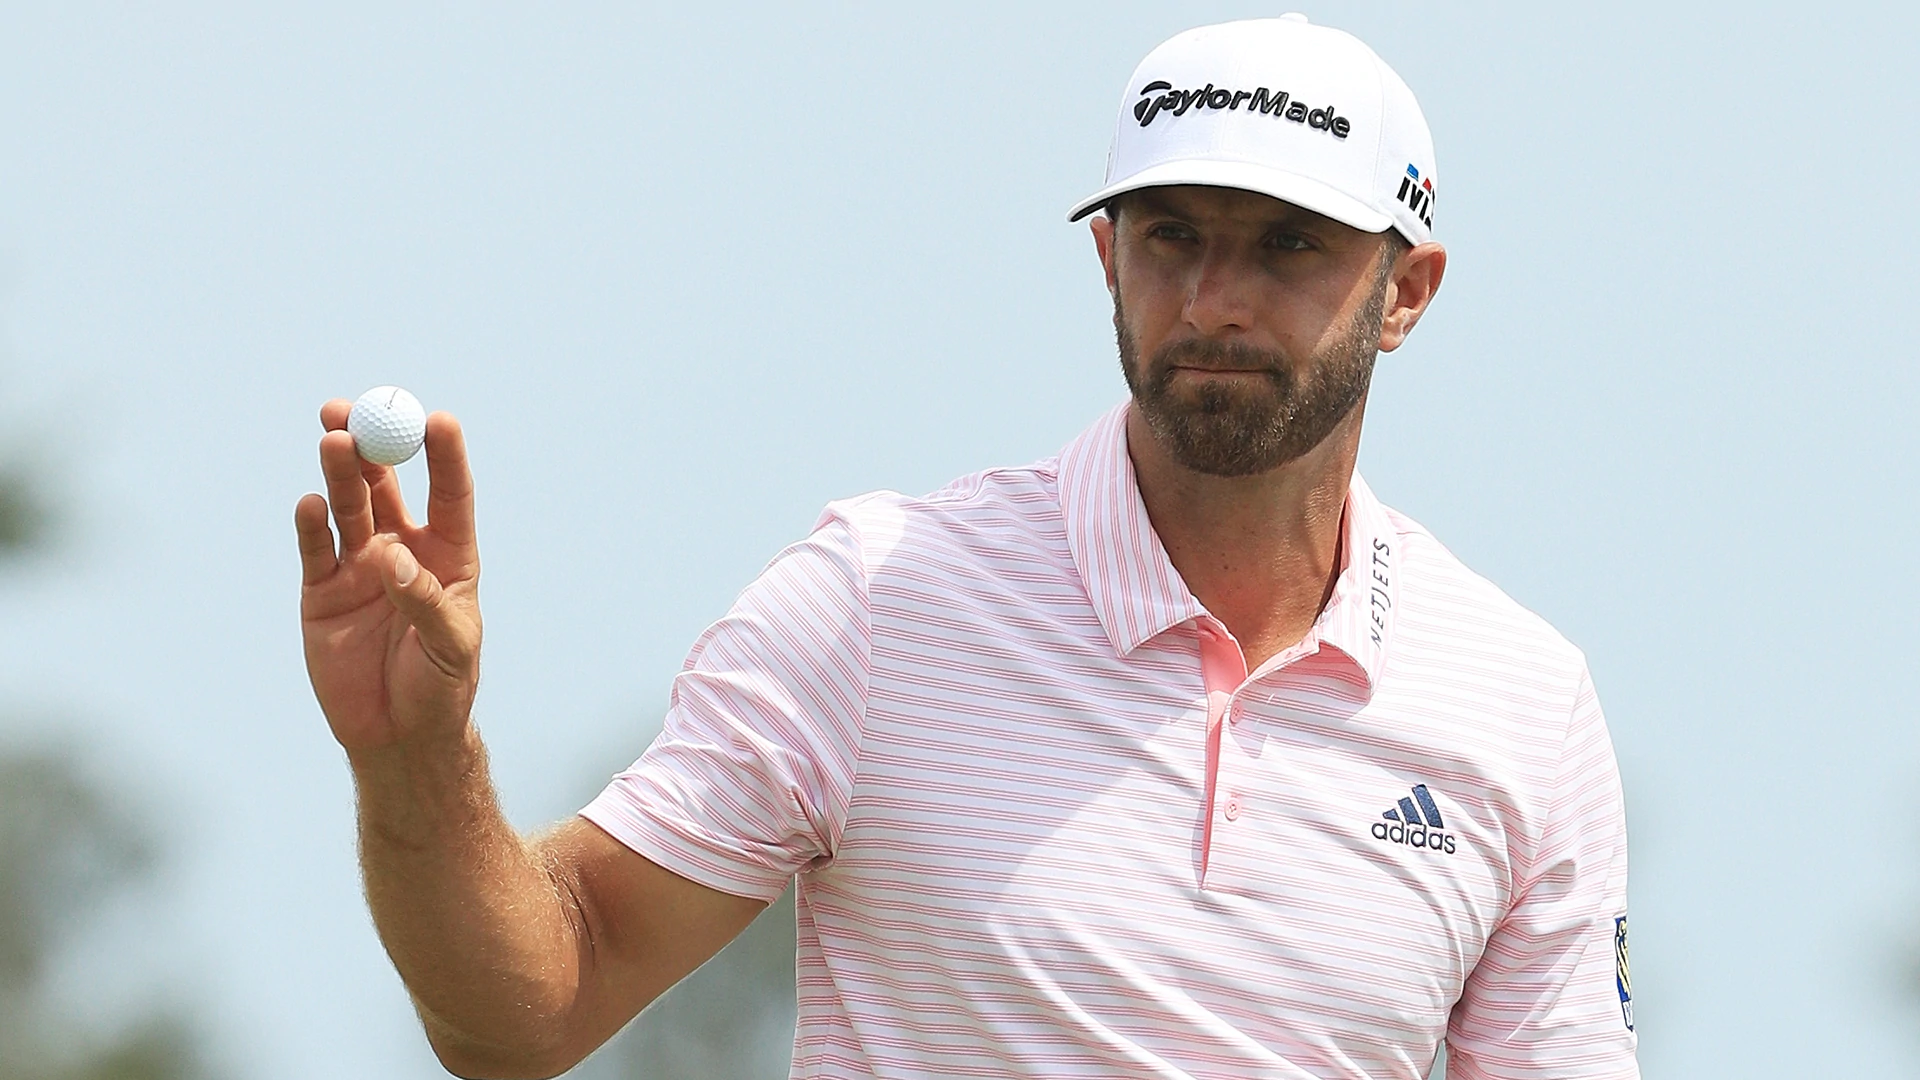 Here's what DJ needs to do Sunday to stay No. 1